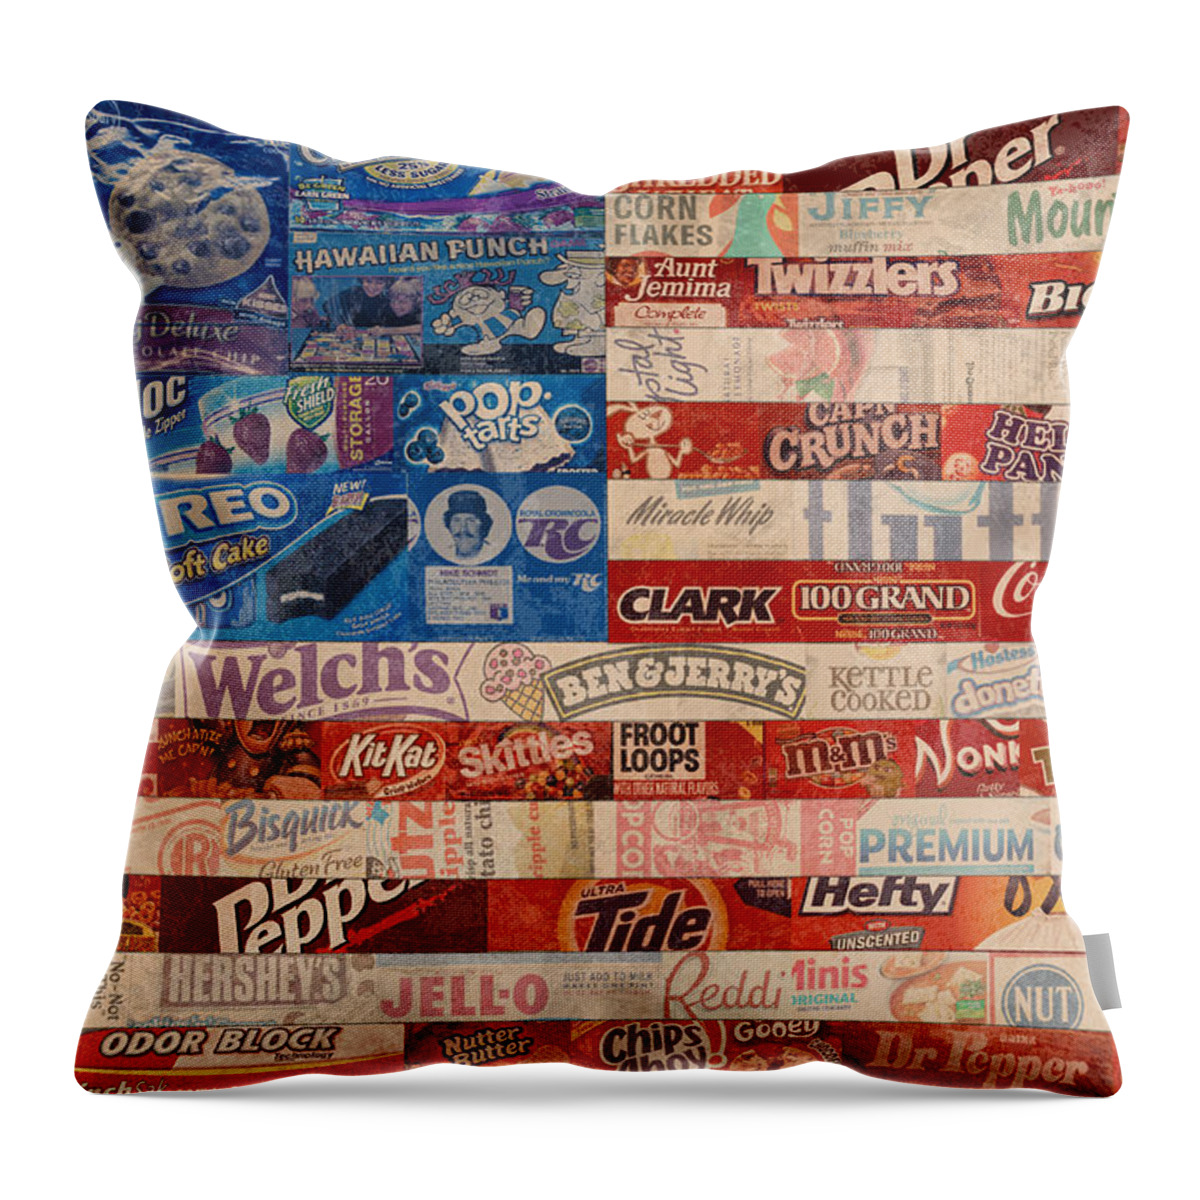 Flag Throw Pillow featuring the mixed media American Flag - Made From Vintage Recycled Pop Culture USA Paper Product Wrappers by Design Turnpike